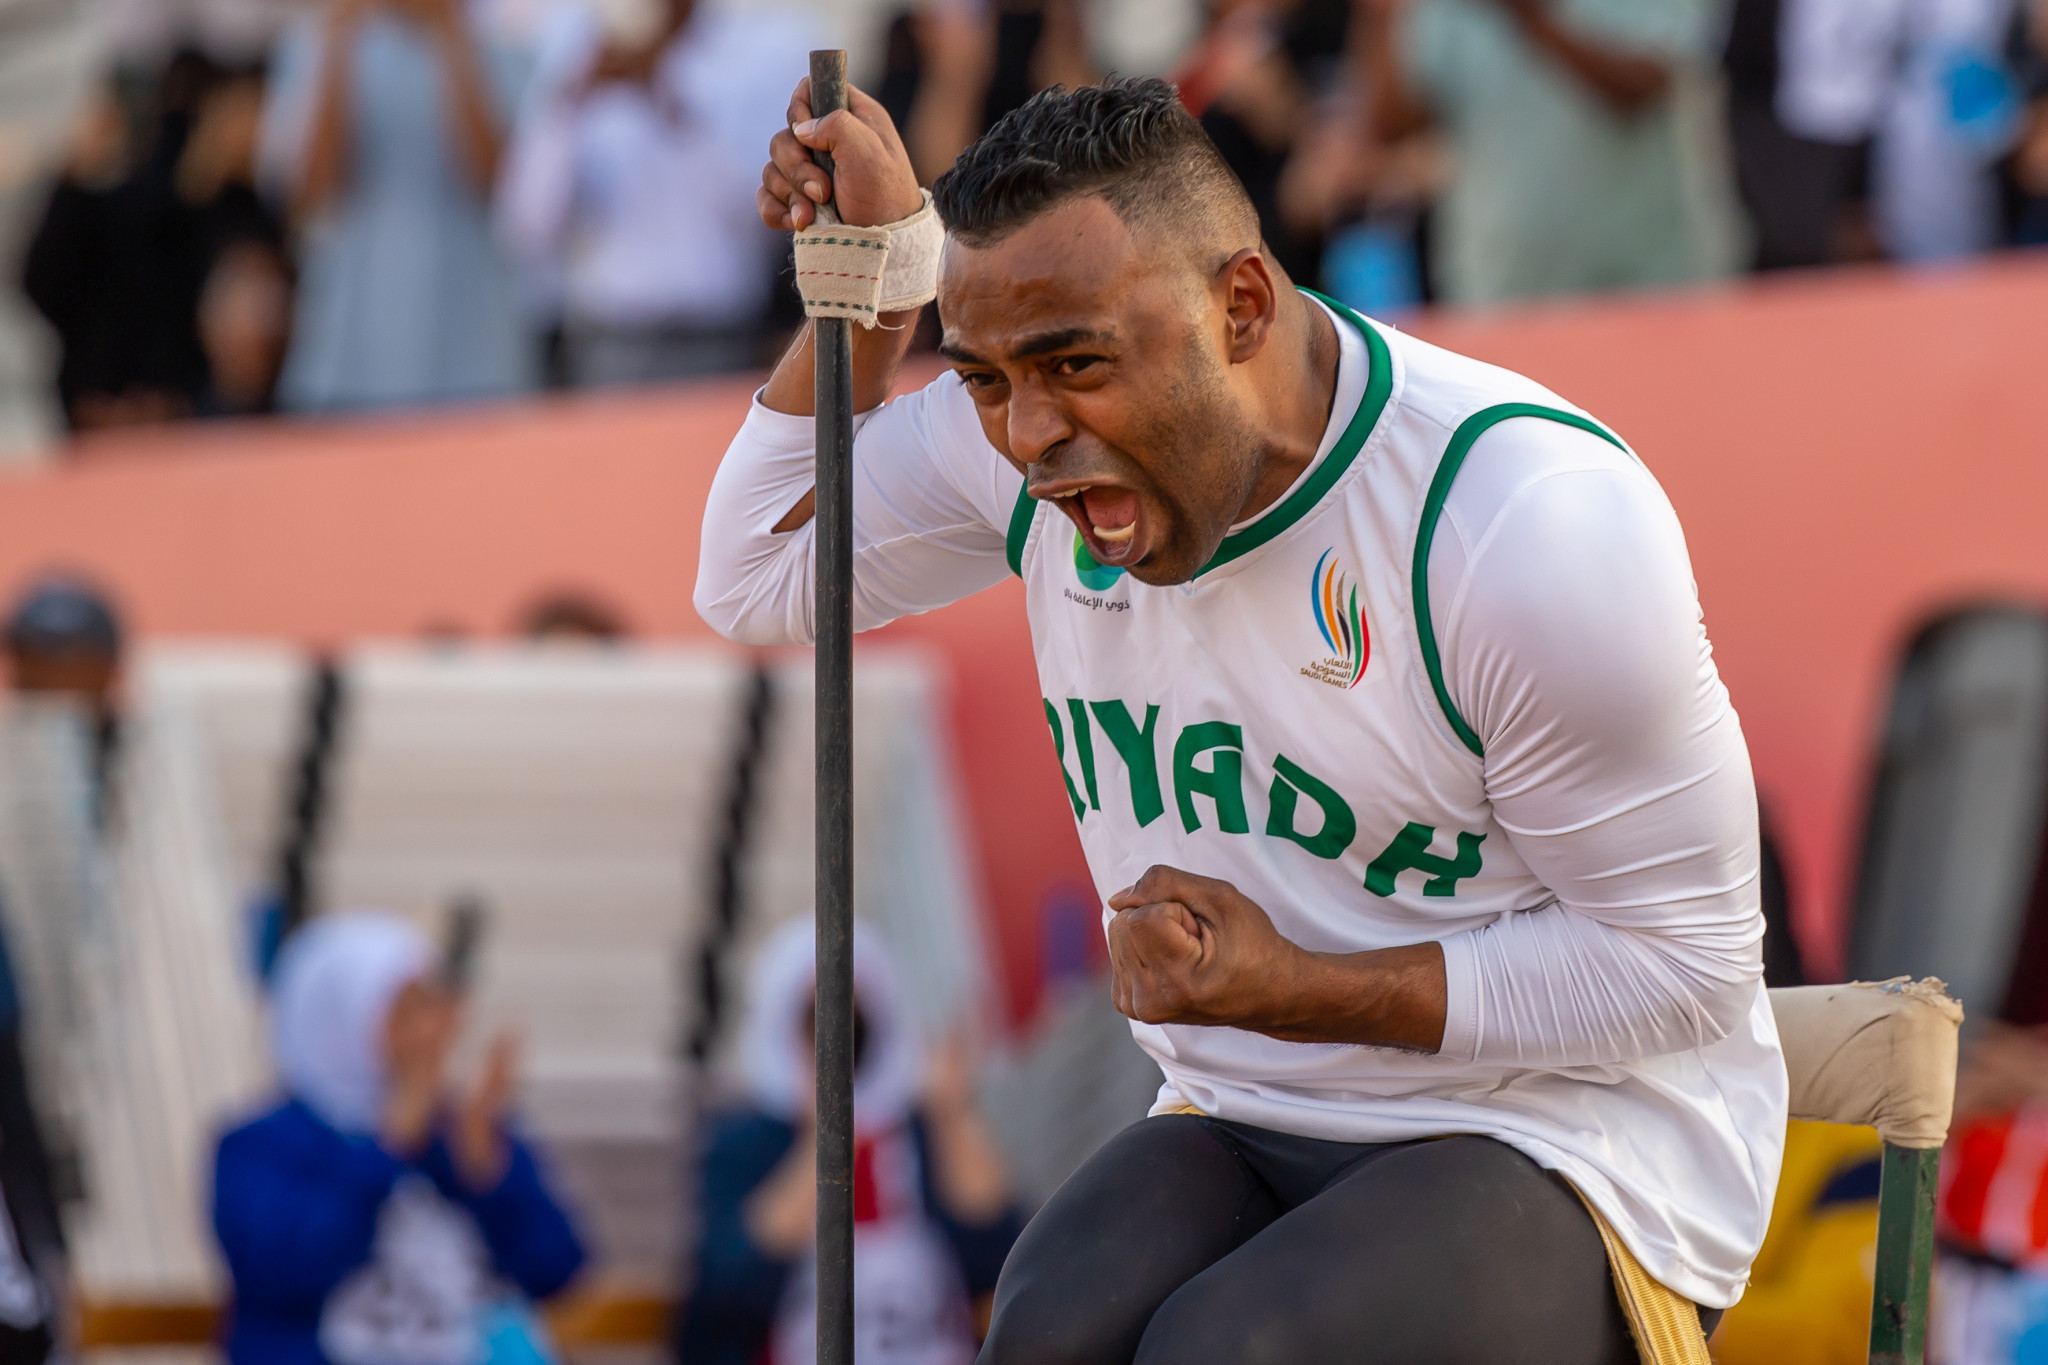 There was no shortage of passion from Hani Al-Nakhli as he won the men's shot put F53 title ©Saudi Games